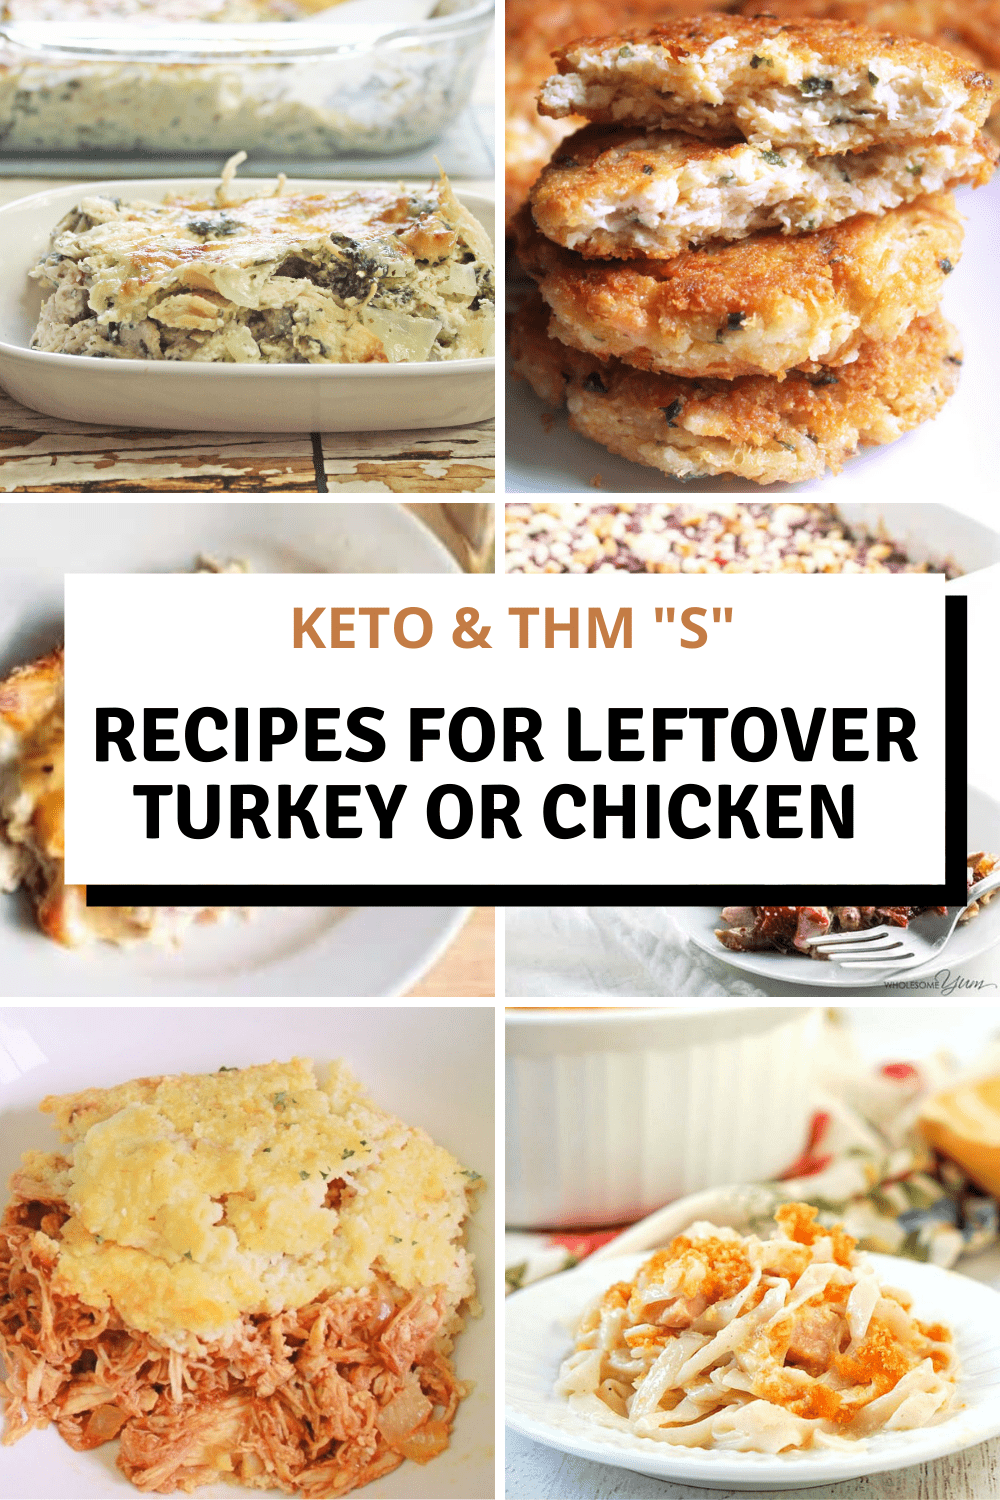 A list of delicious casseroles, soups, and main dishes to use leftover turkey or chicken. #leftovers #ketoholidayrecipes #THMRecipes